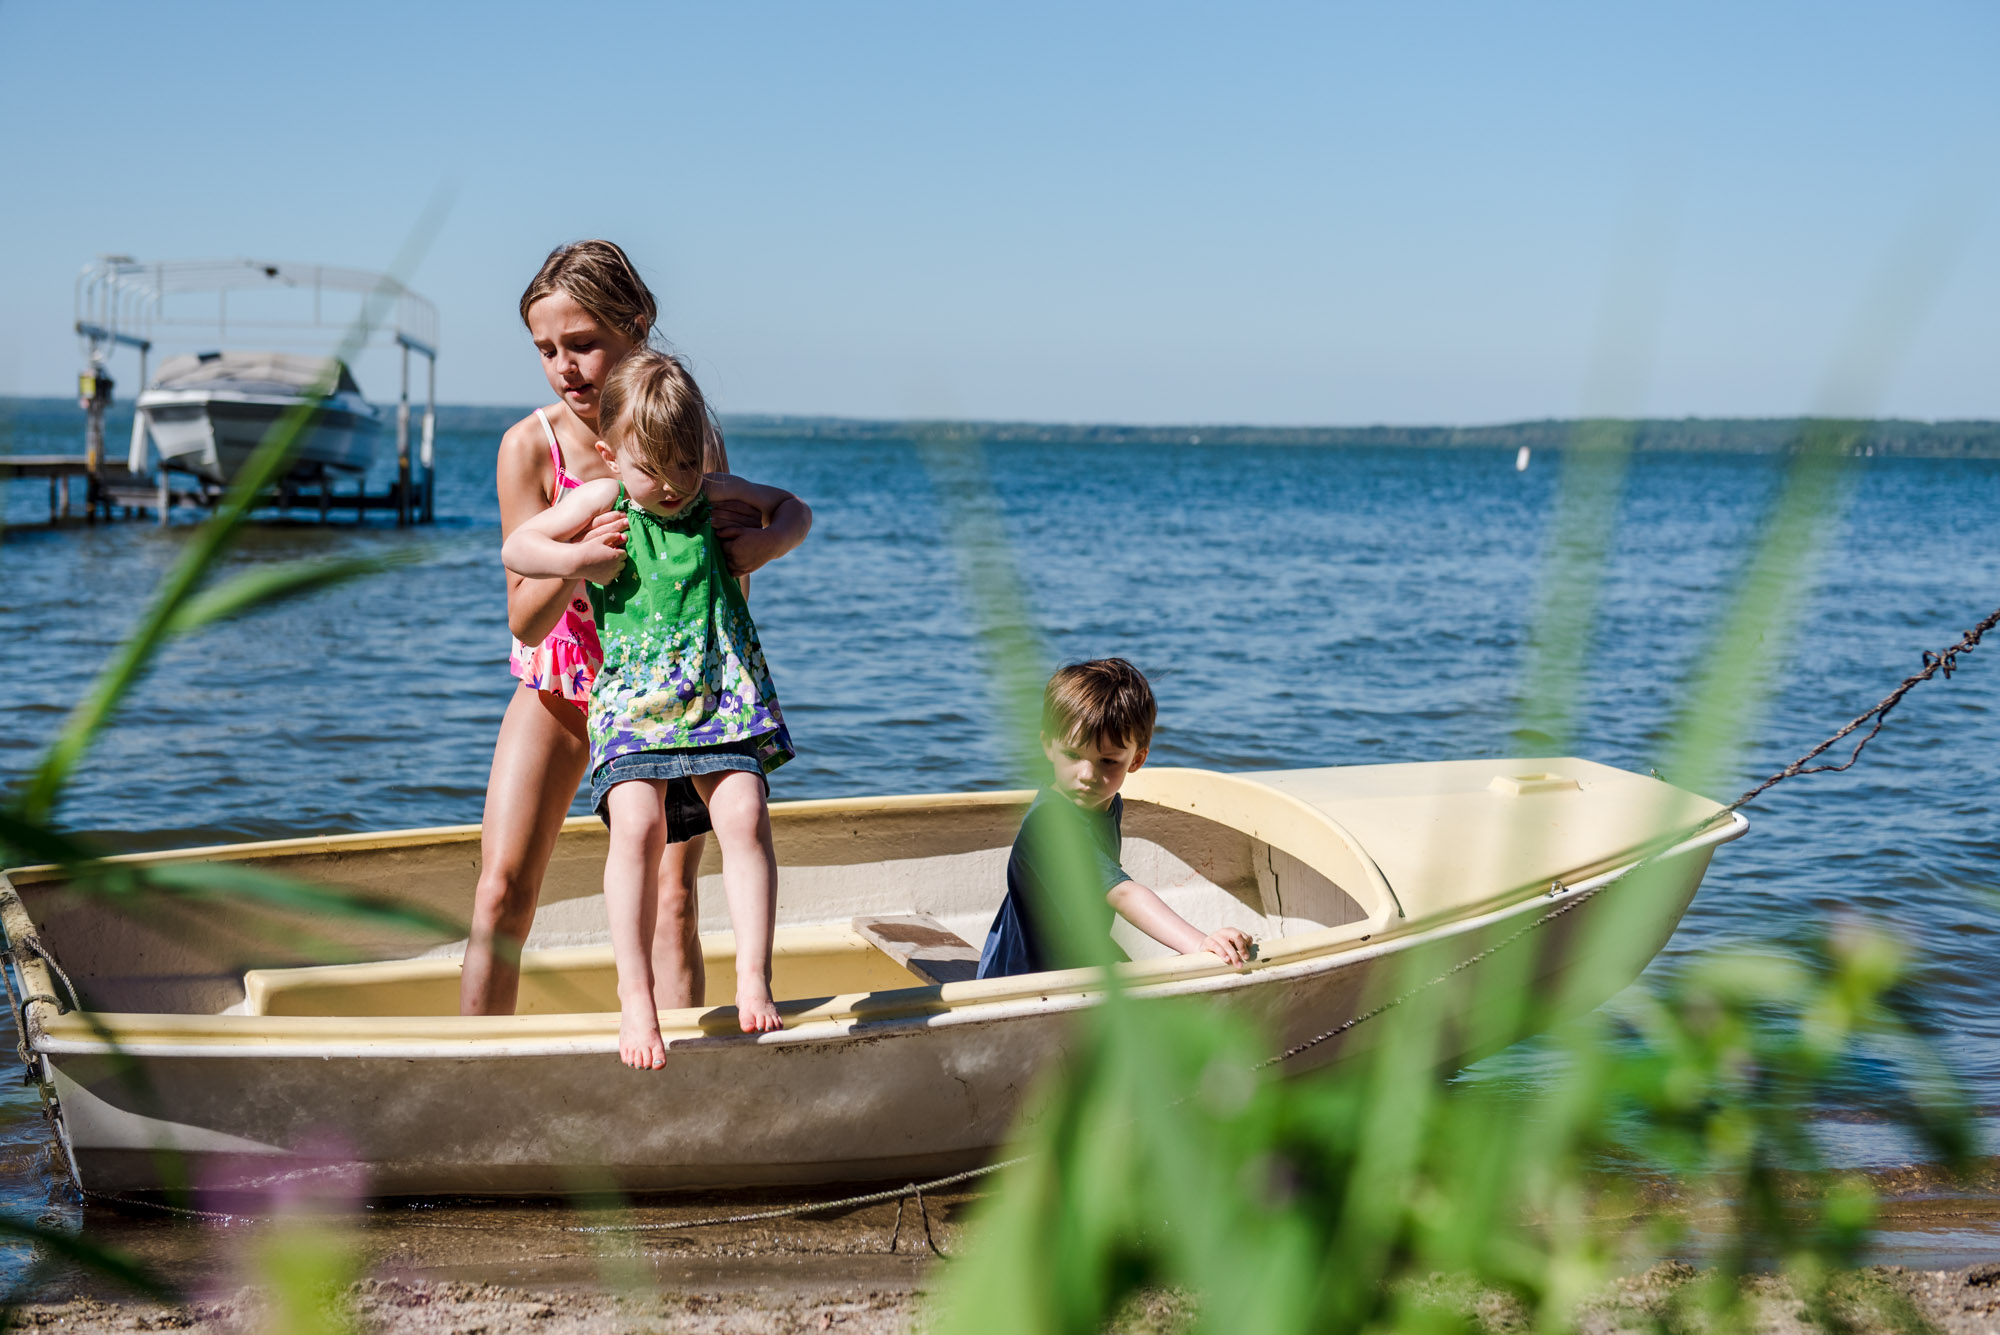 A young girl helps a little girl out of a boat on pigeon lake during a family photo session